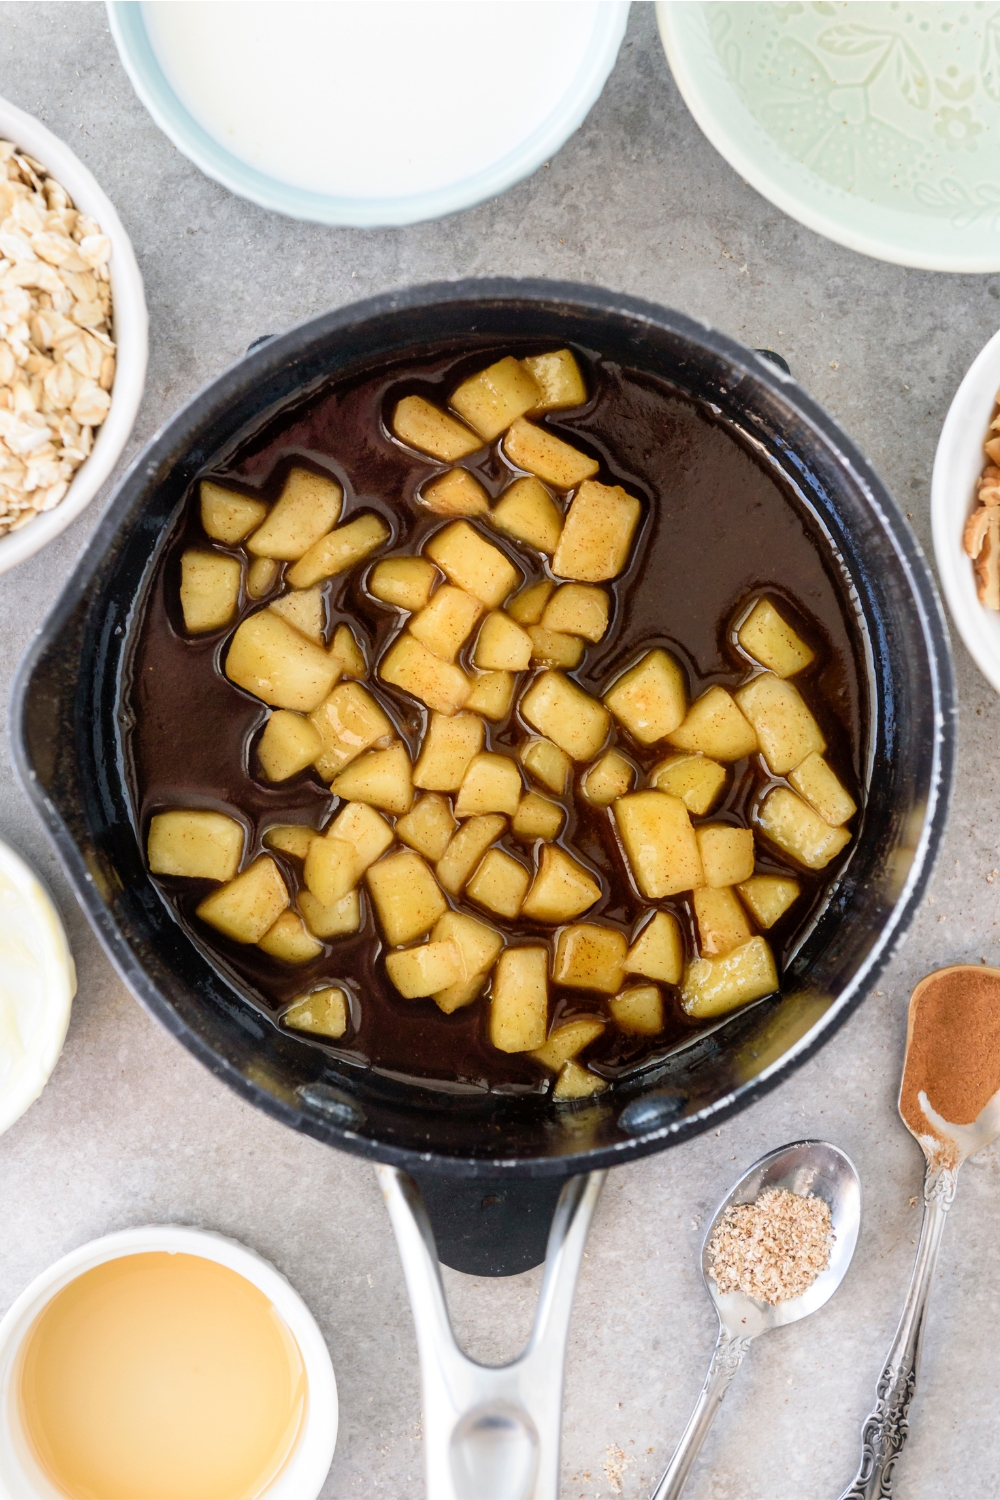 A pot filled with diced apples in honey.